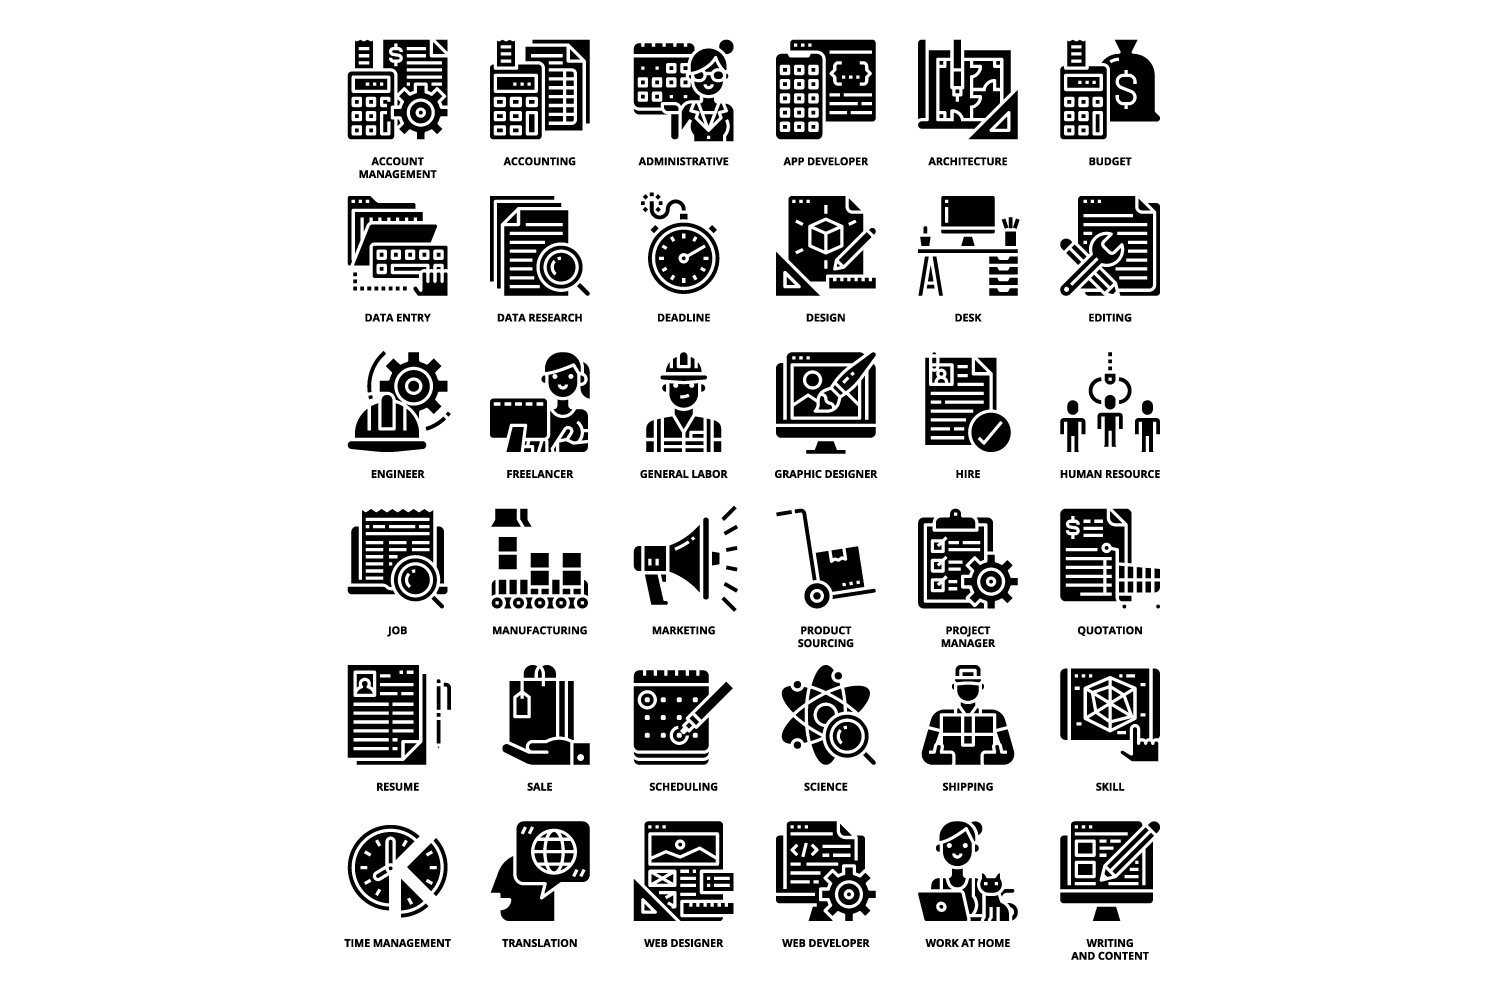 Series of black and white icons depicting various things.